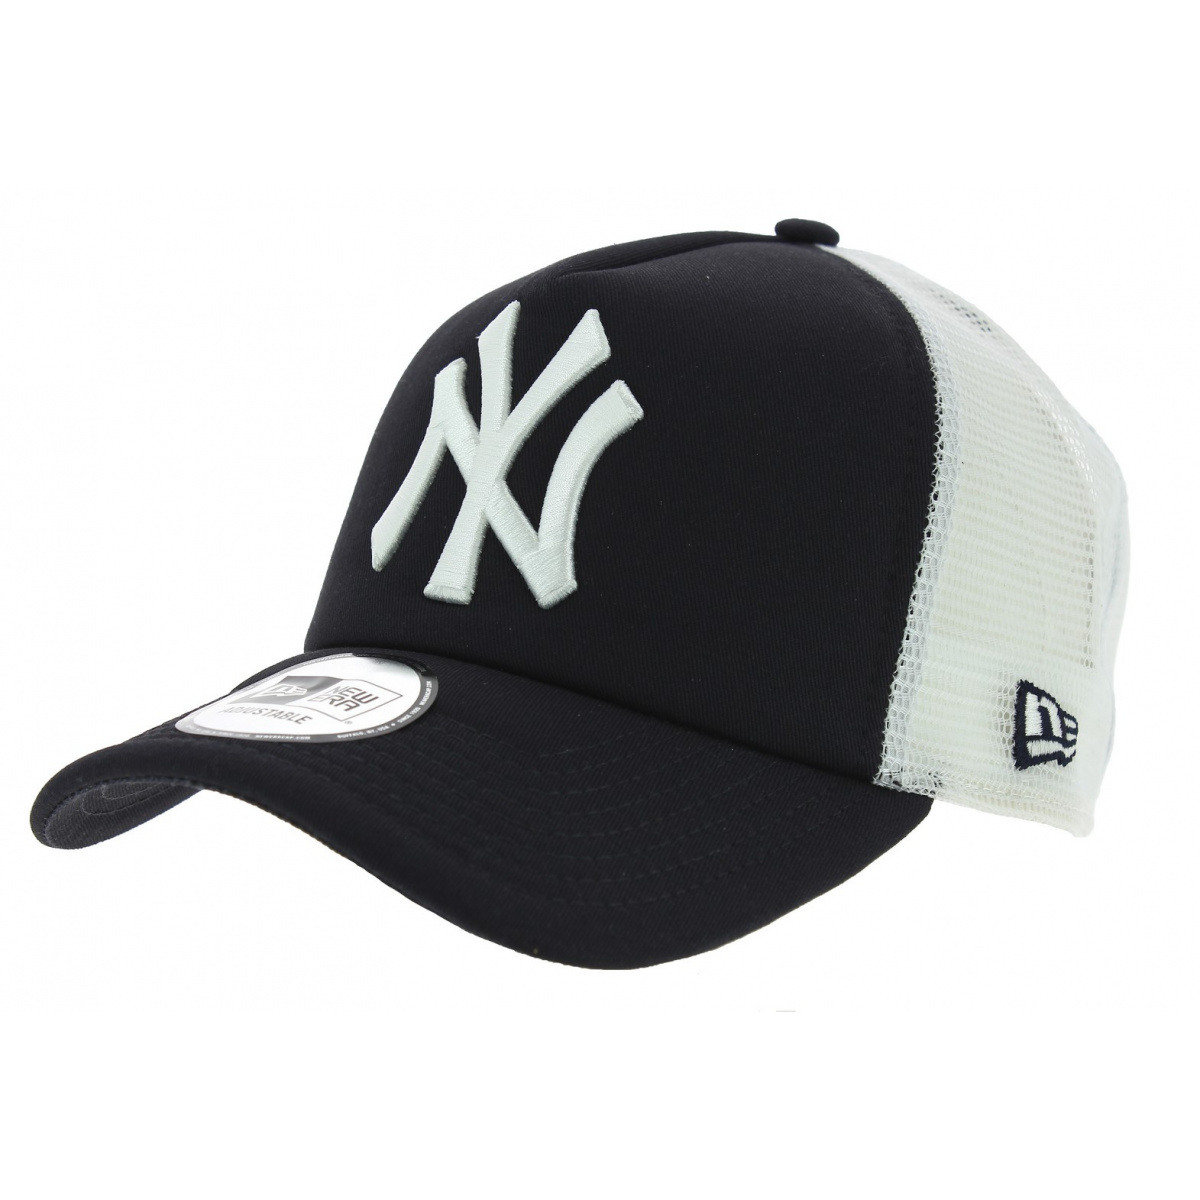 Casquette New York Yankees New Era noire à rayures 9FIFTY Snapback Trucker  pour homme